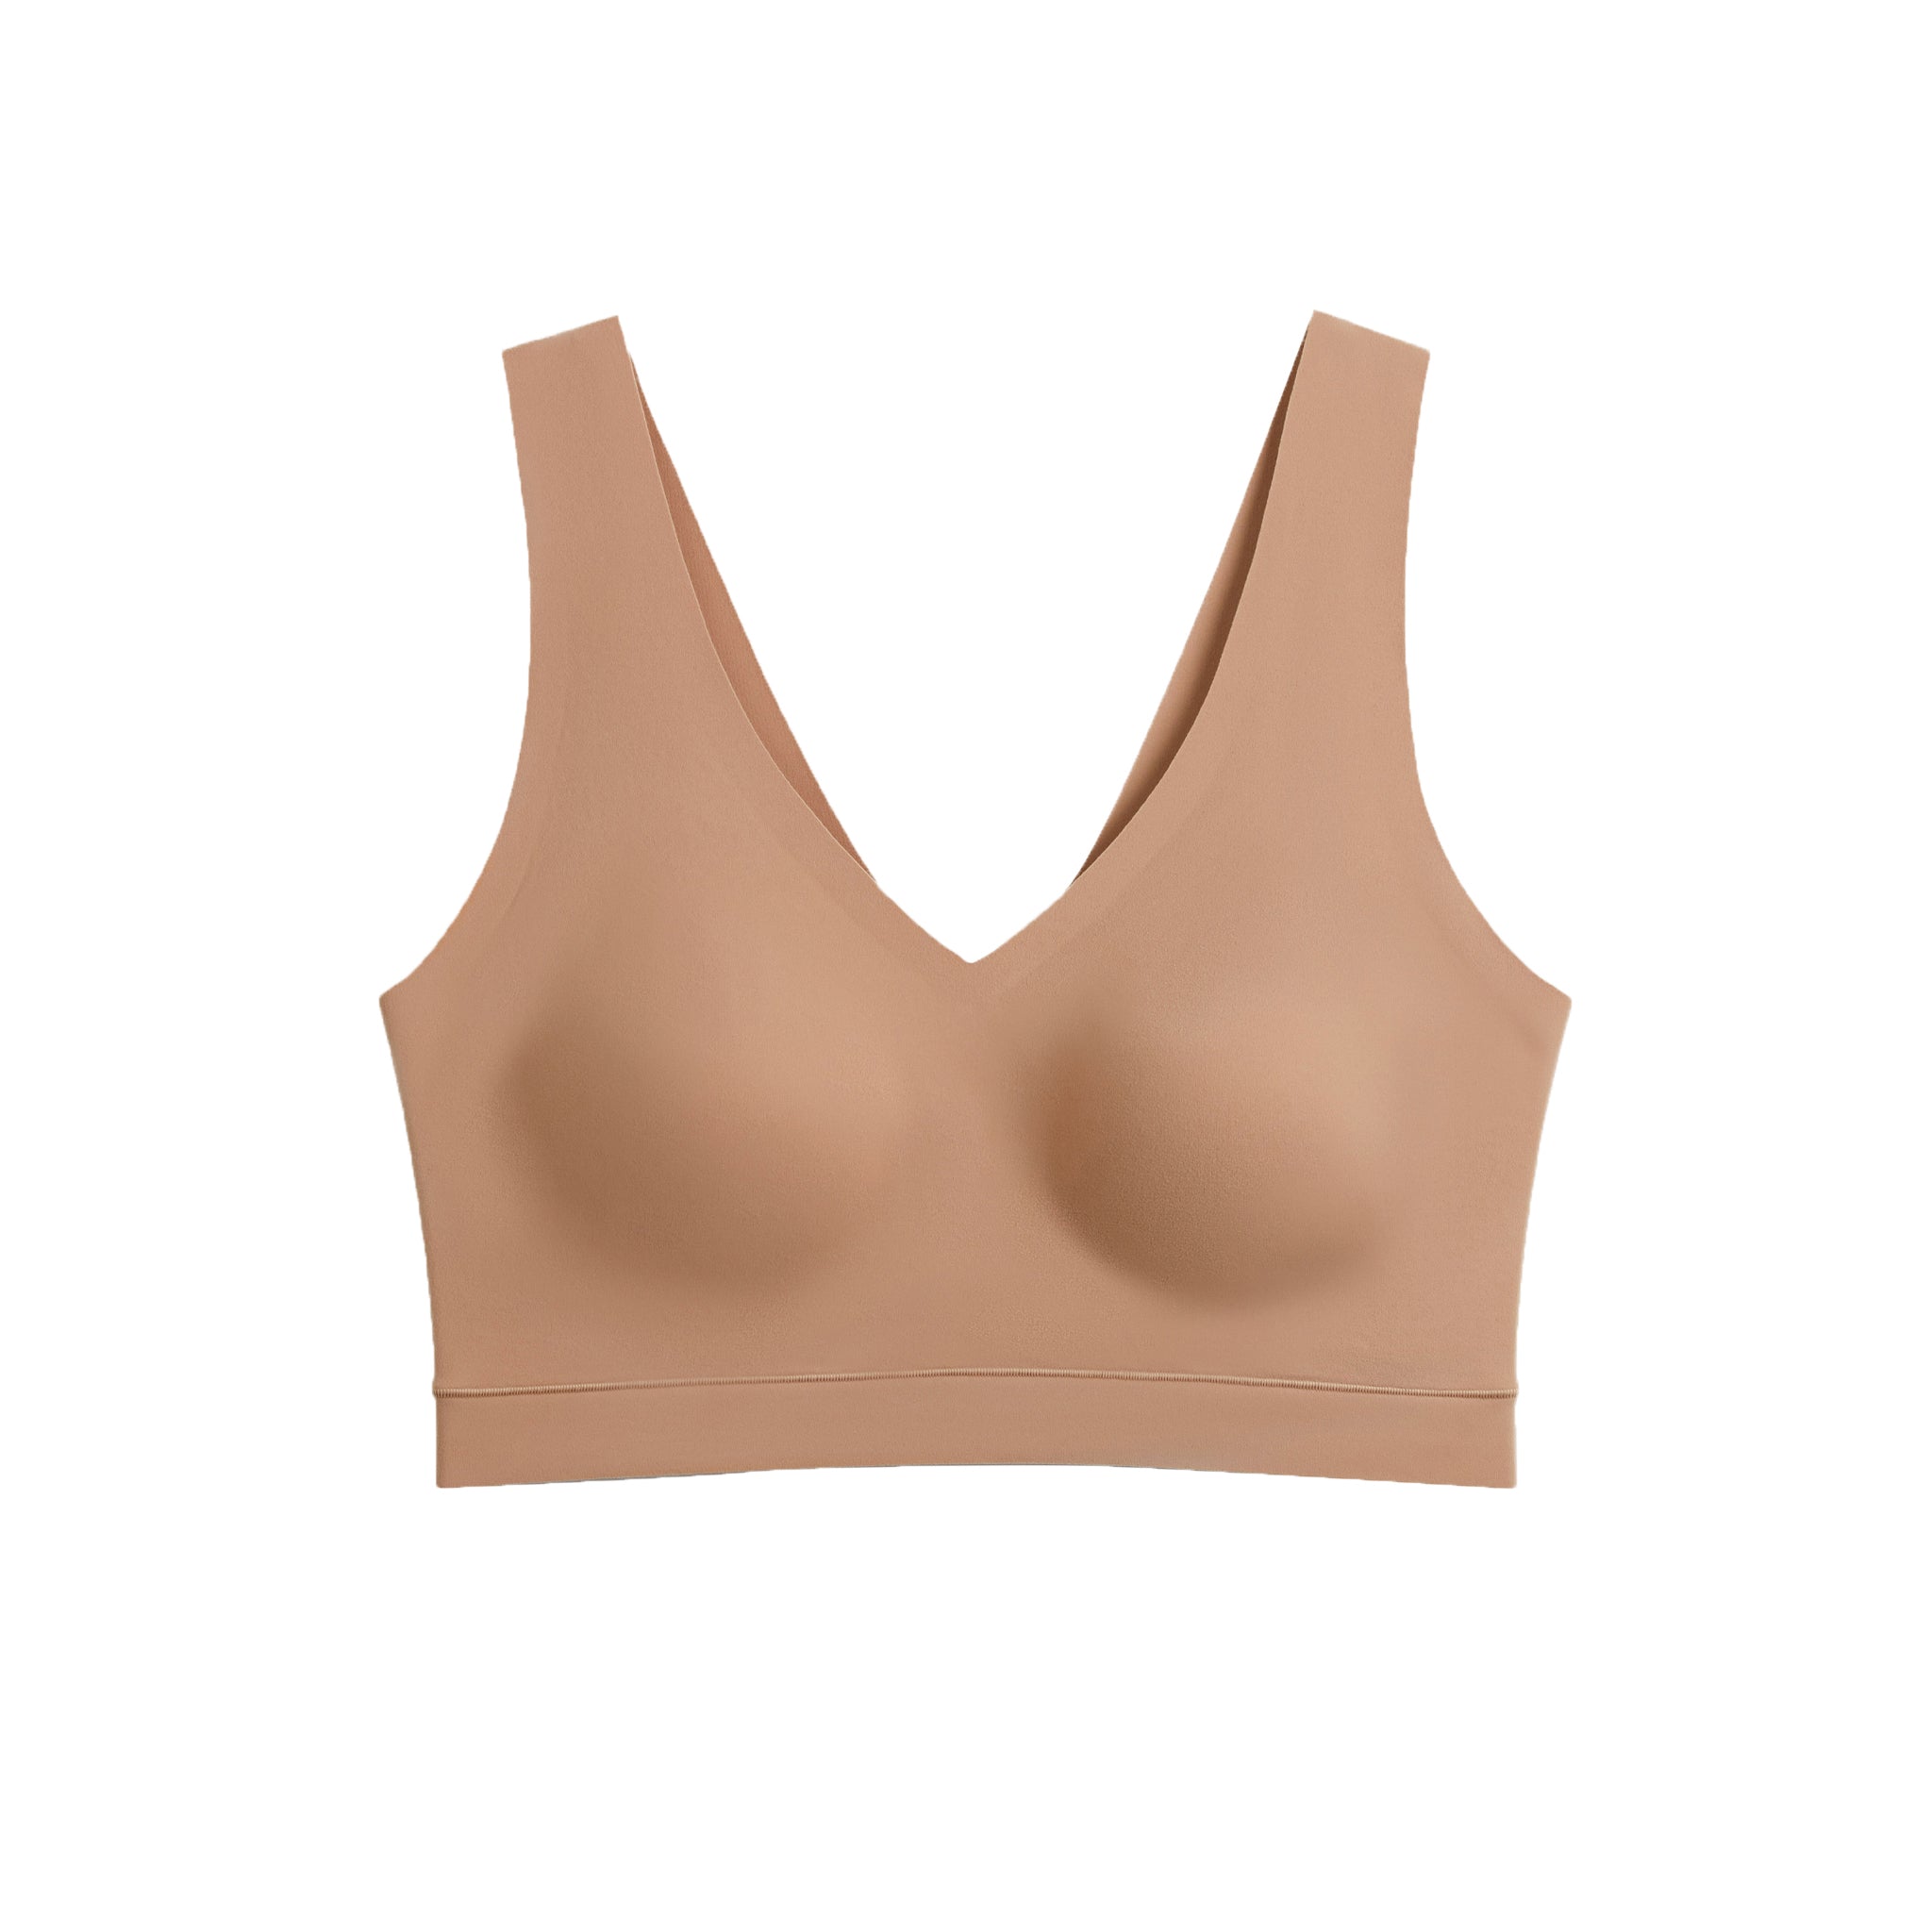 I'm a 38DD and the Floatley T-Shirt Bra Is a Comfy Underwire Option